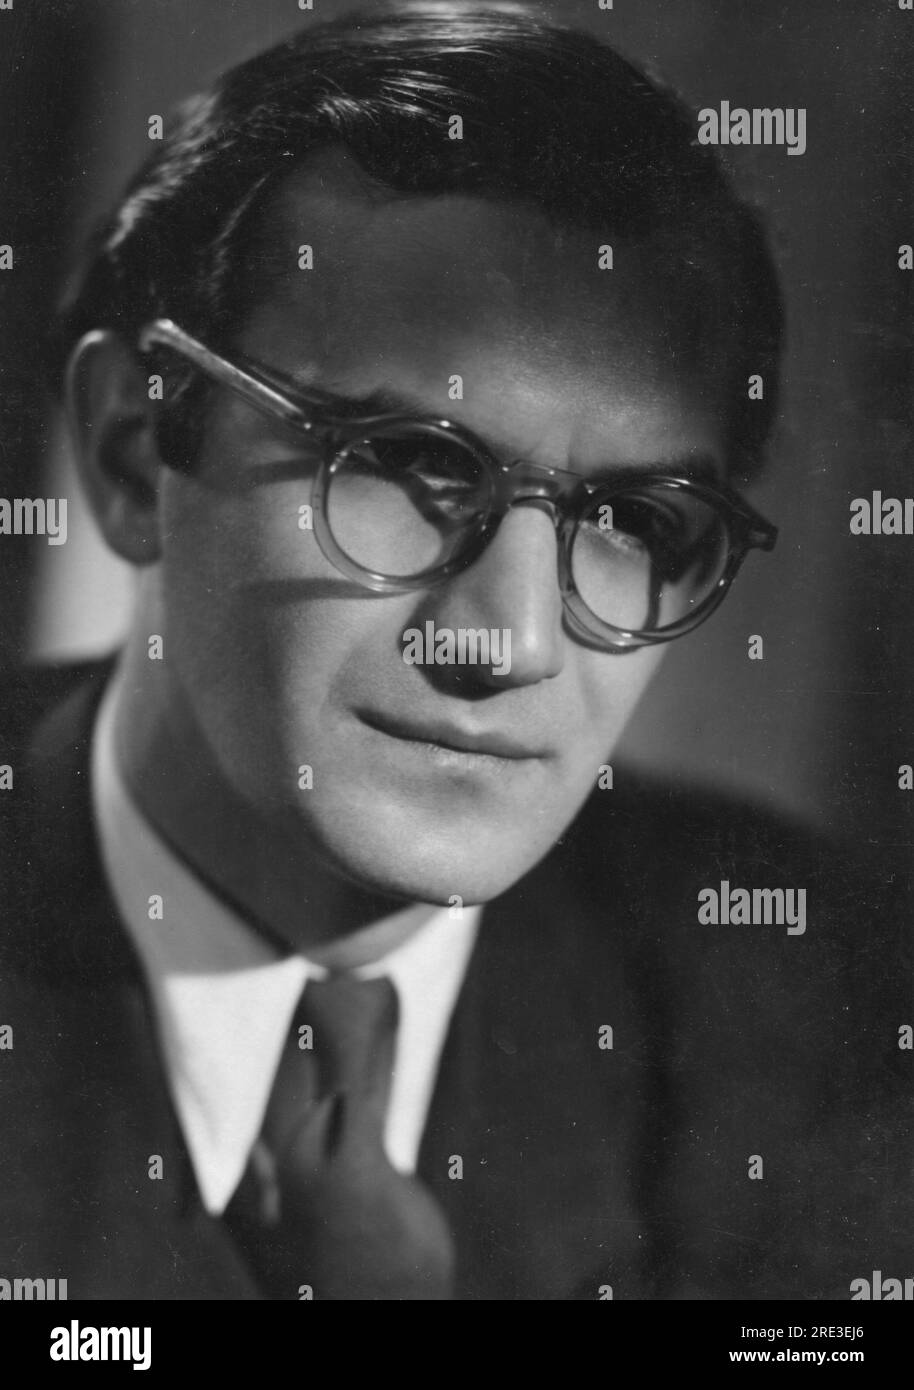 1950s men glasses Black and White Stock Photos & Images - Alamy